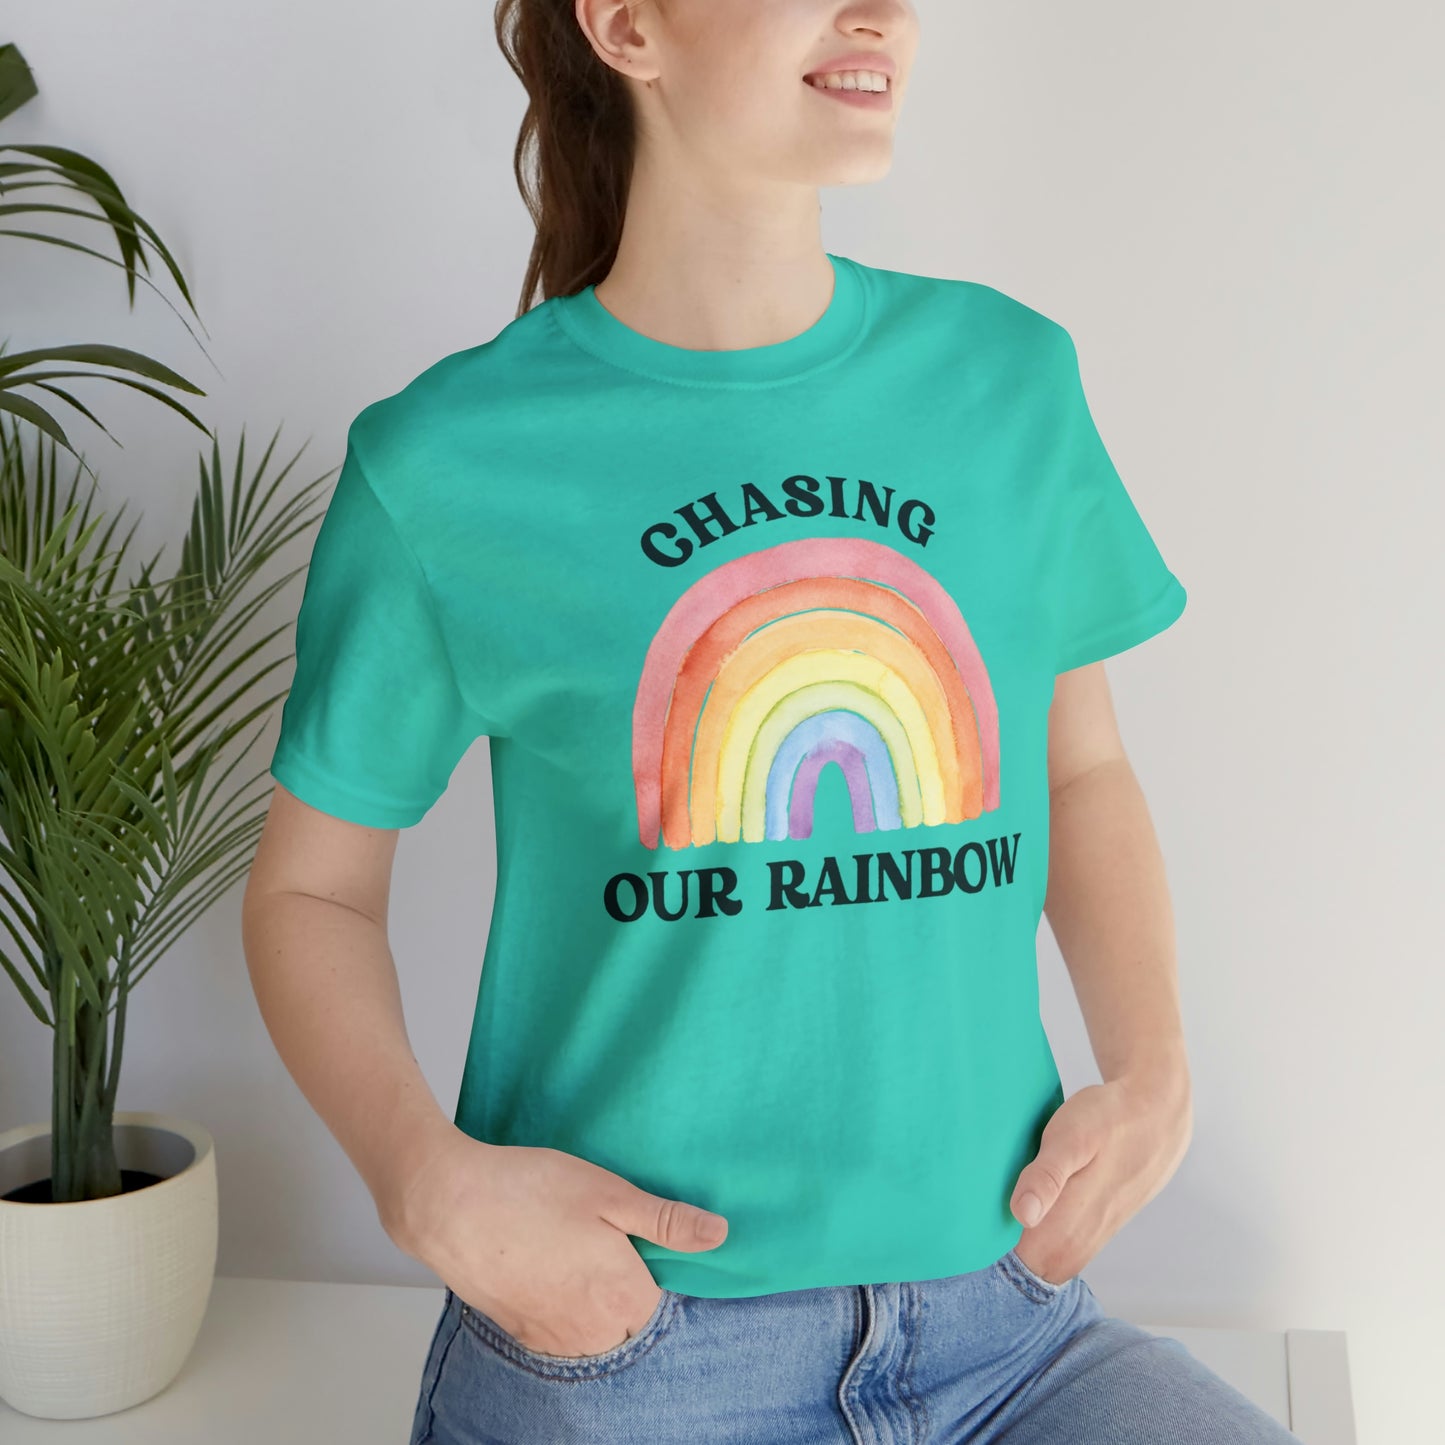 Chasing Our Rainbow